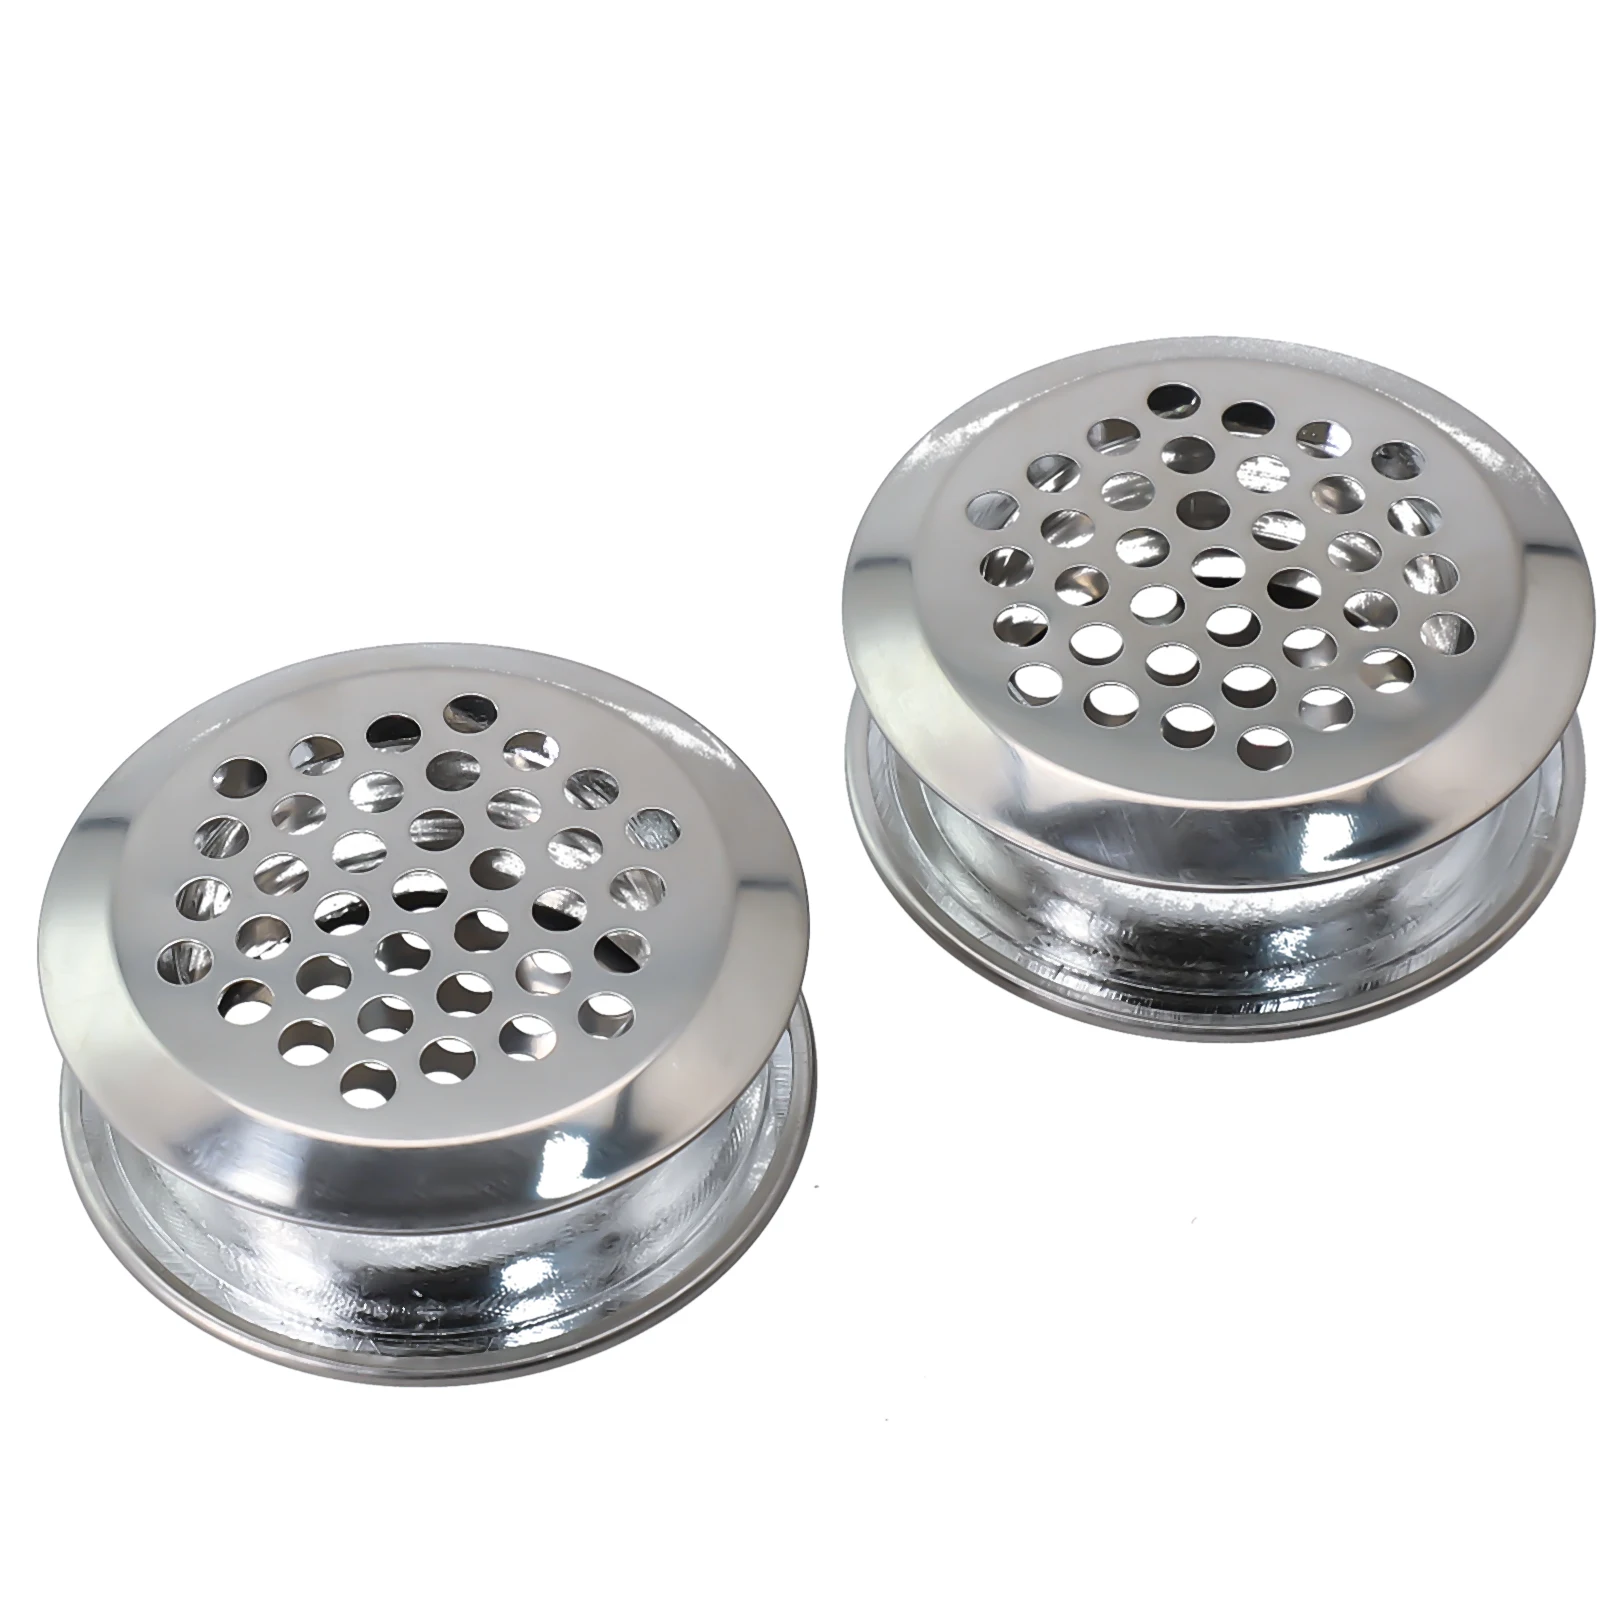 

2Pcs Air Duct Vent Round Cabinet Air Vent Grille Wardrobe Cabinet Metal Ventilation Plugs Stainless Steel Mesh Hole Plug Cover